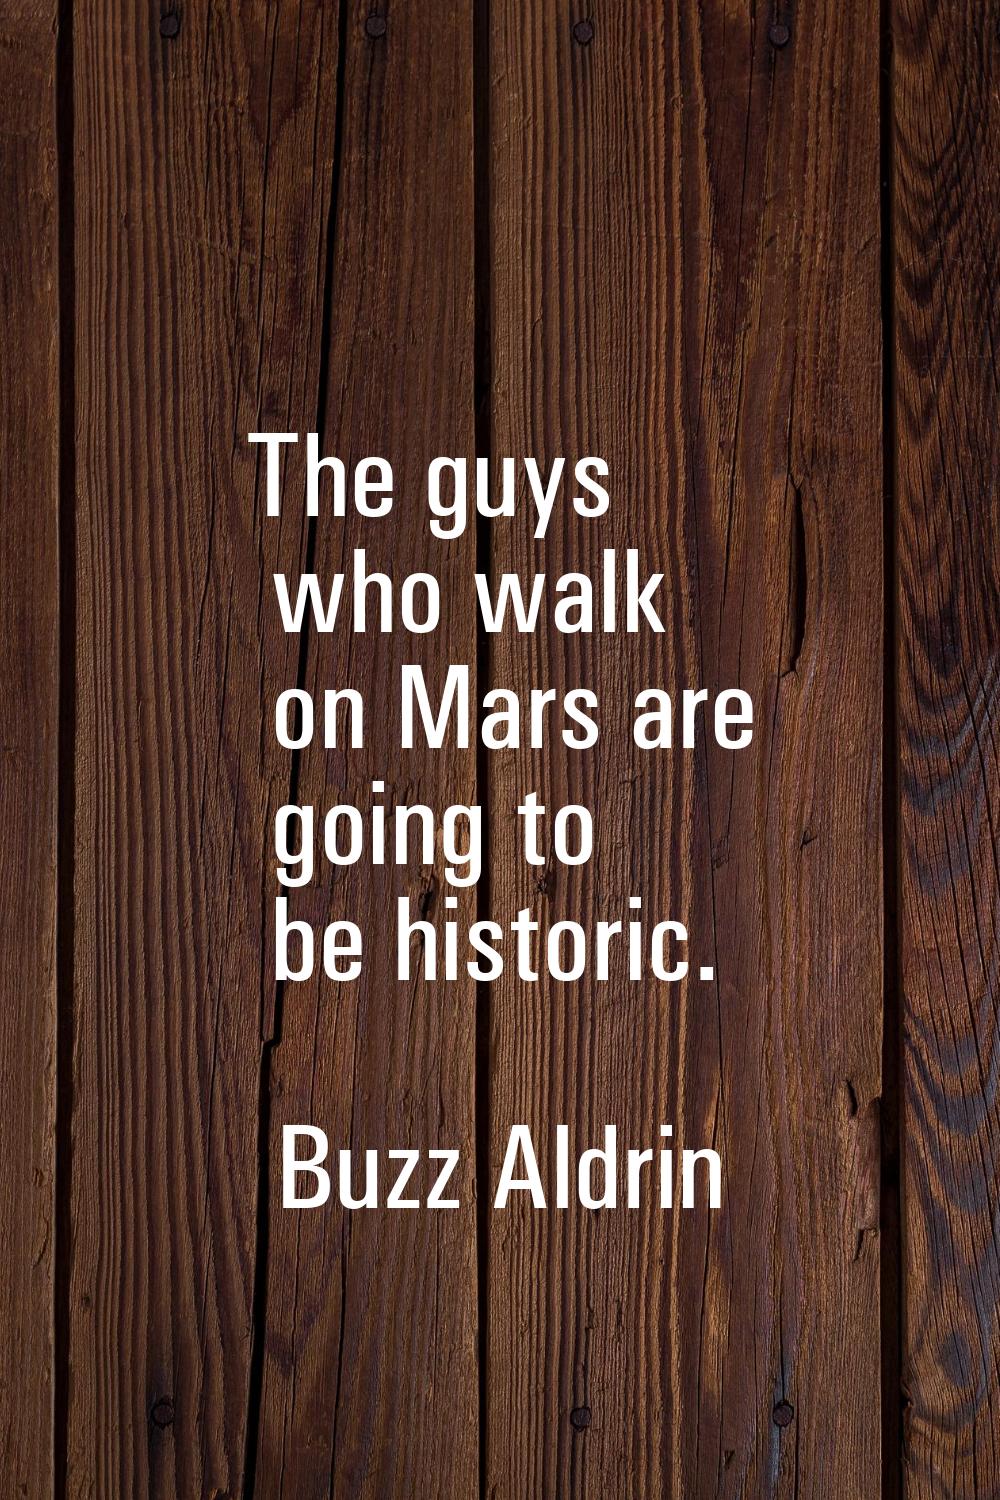 The guys who walk on Mars are going to be historic.